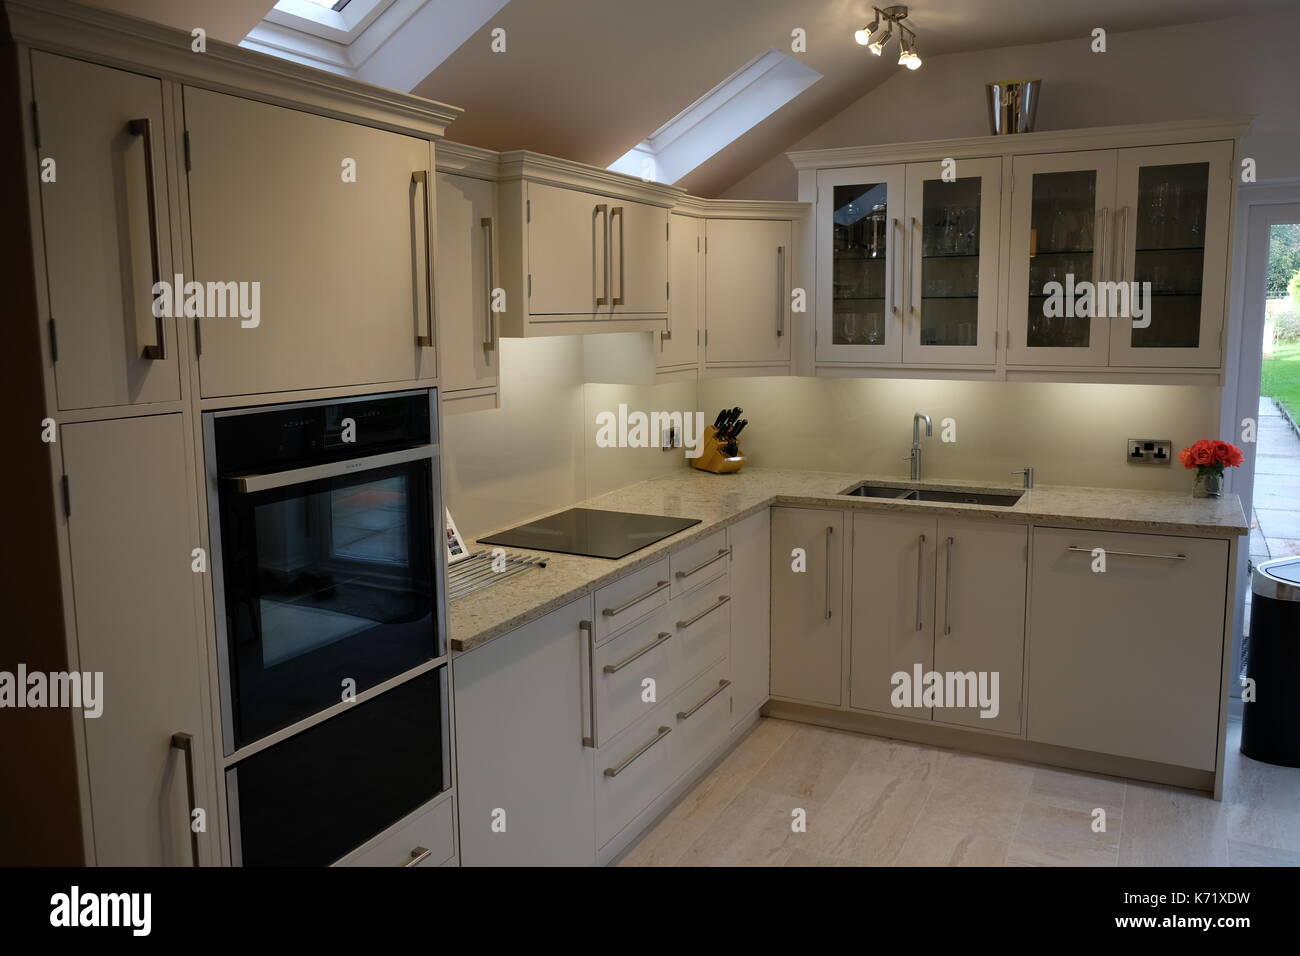 https://c8.alamy.com/comp/K71XDW/contemporary-kitchen-period-house-clean-and-uncluttered-modern-grey-K71XDW.jpg